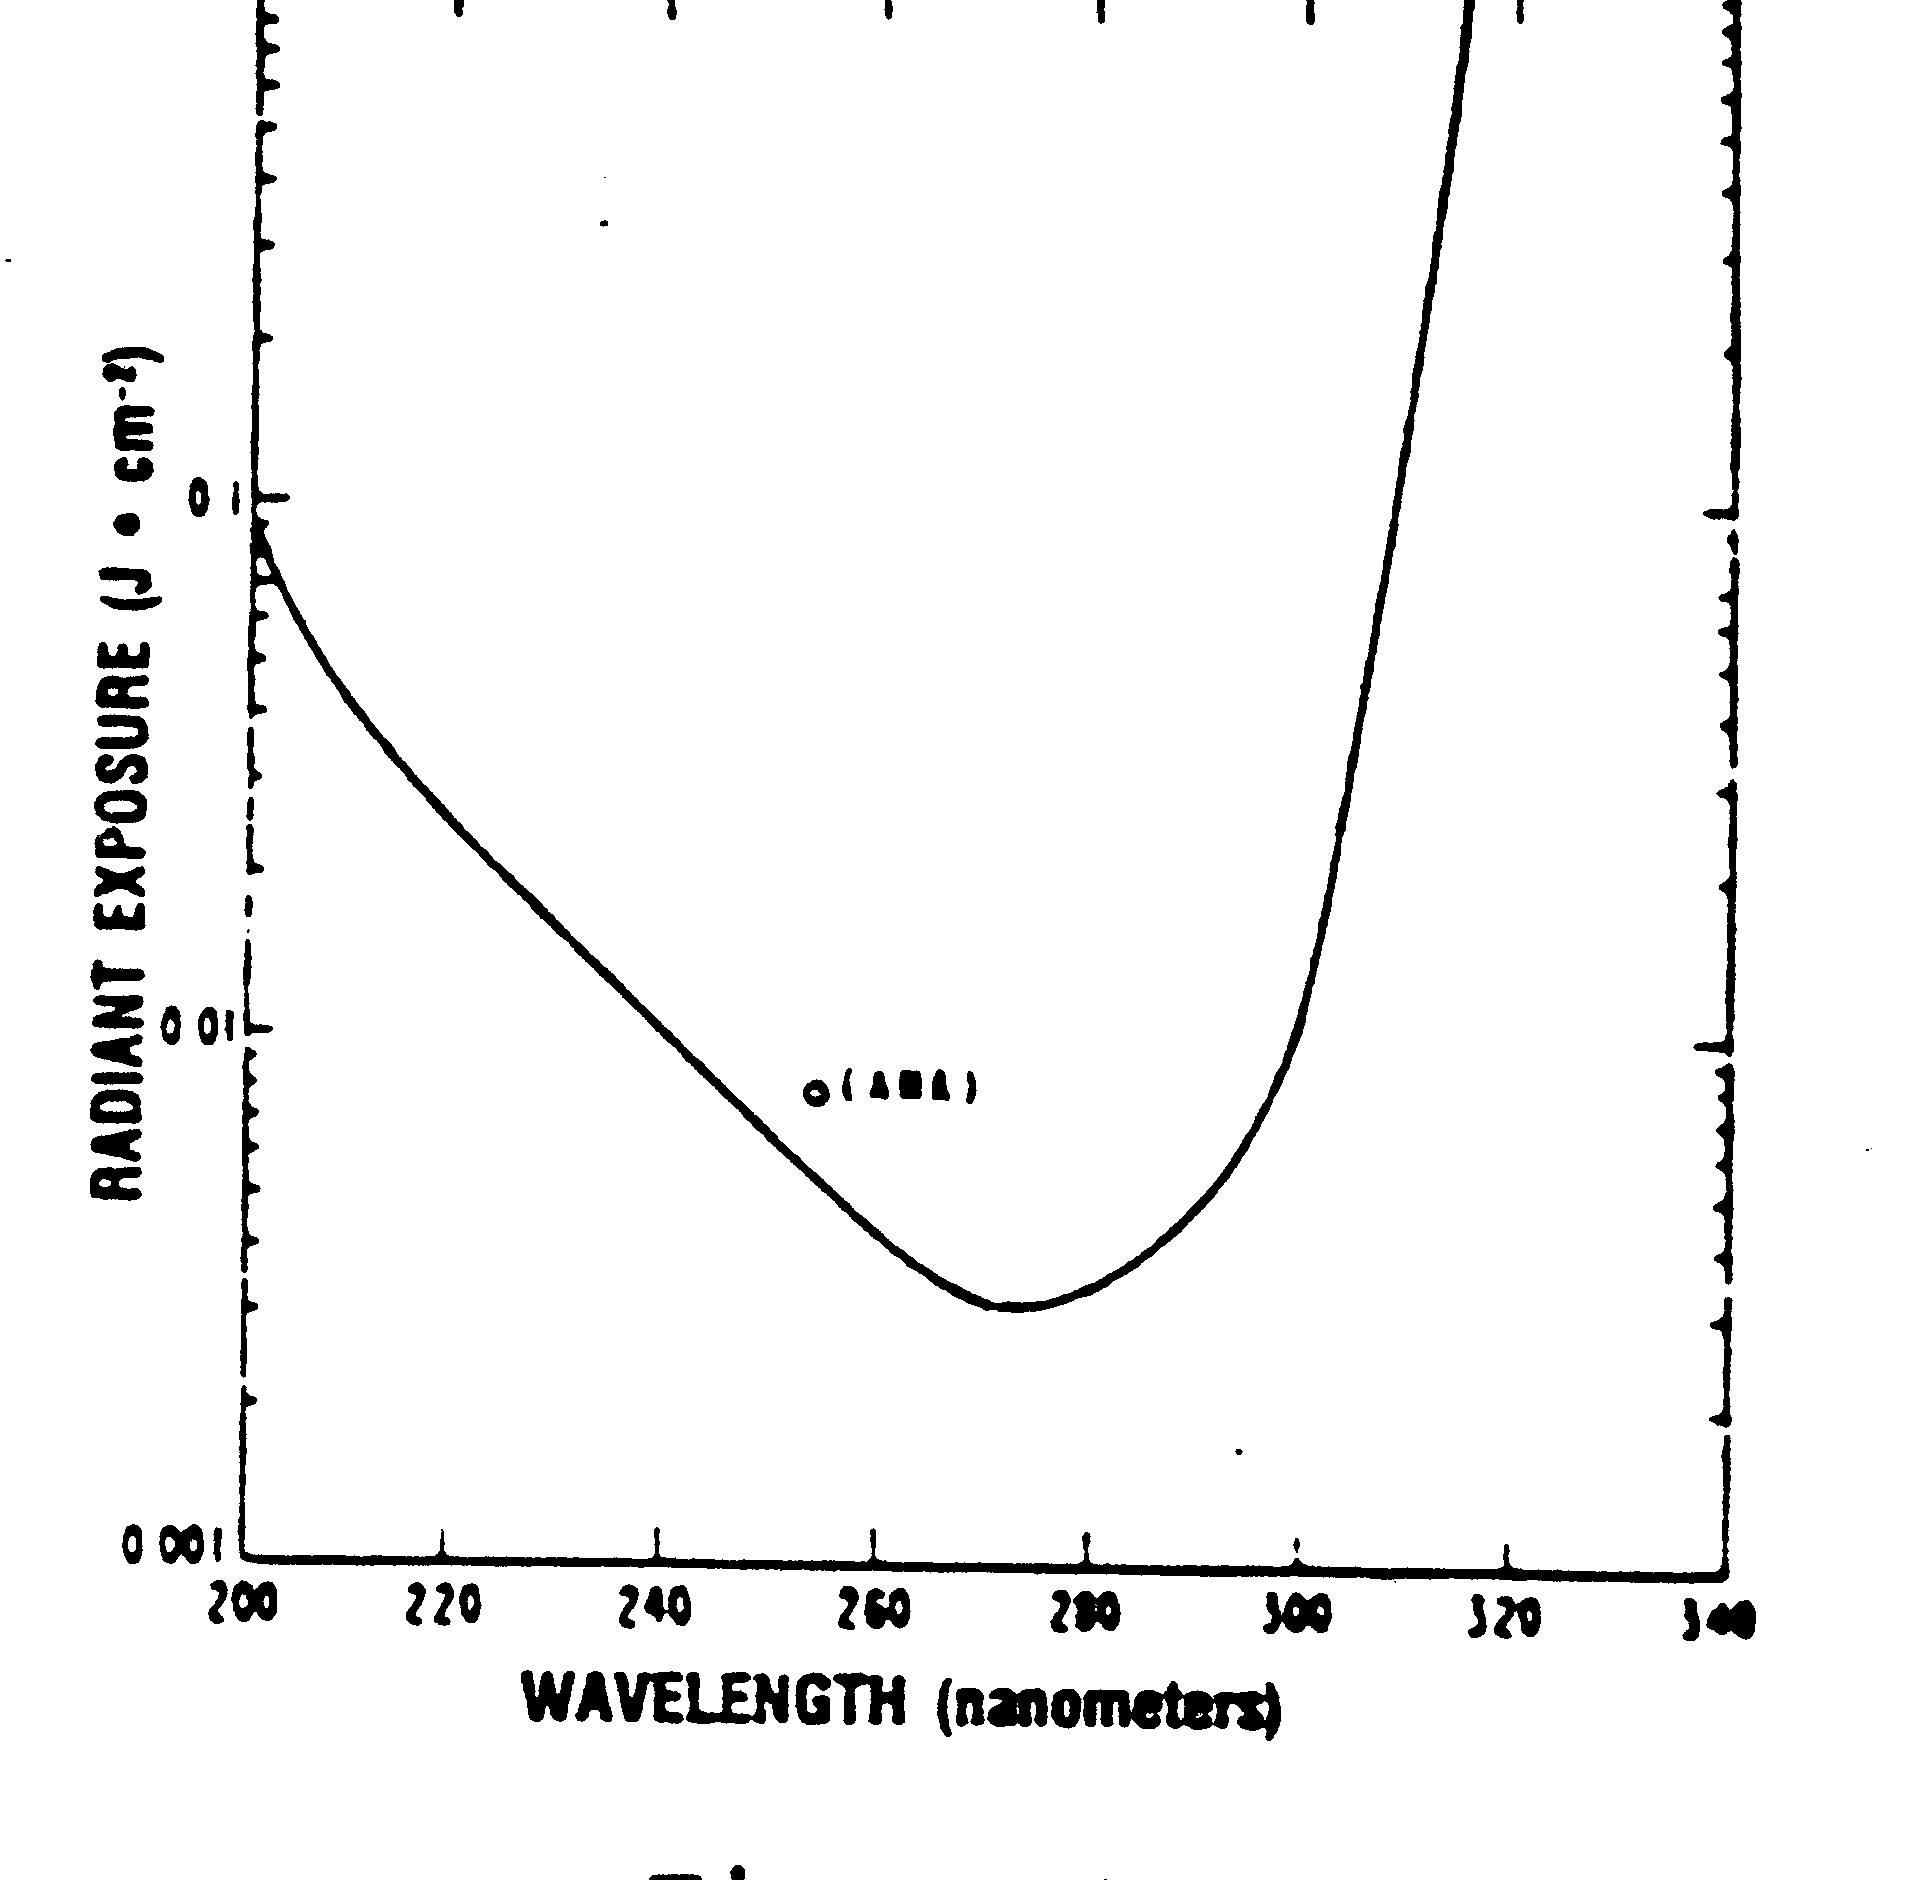 graph of radiance exposure over wavelength